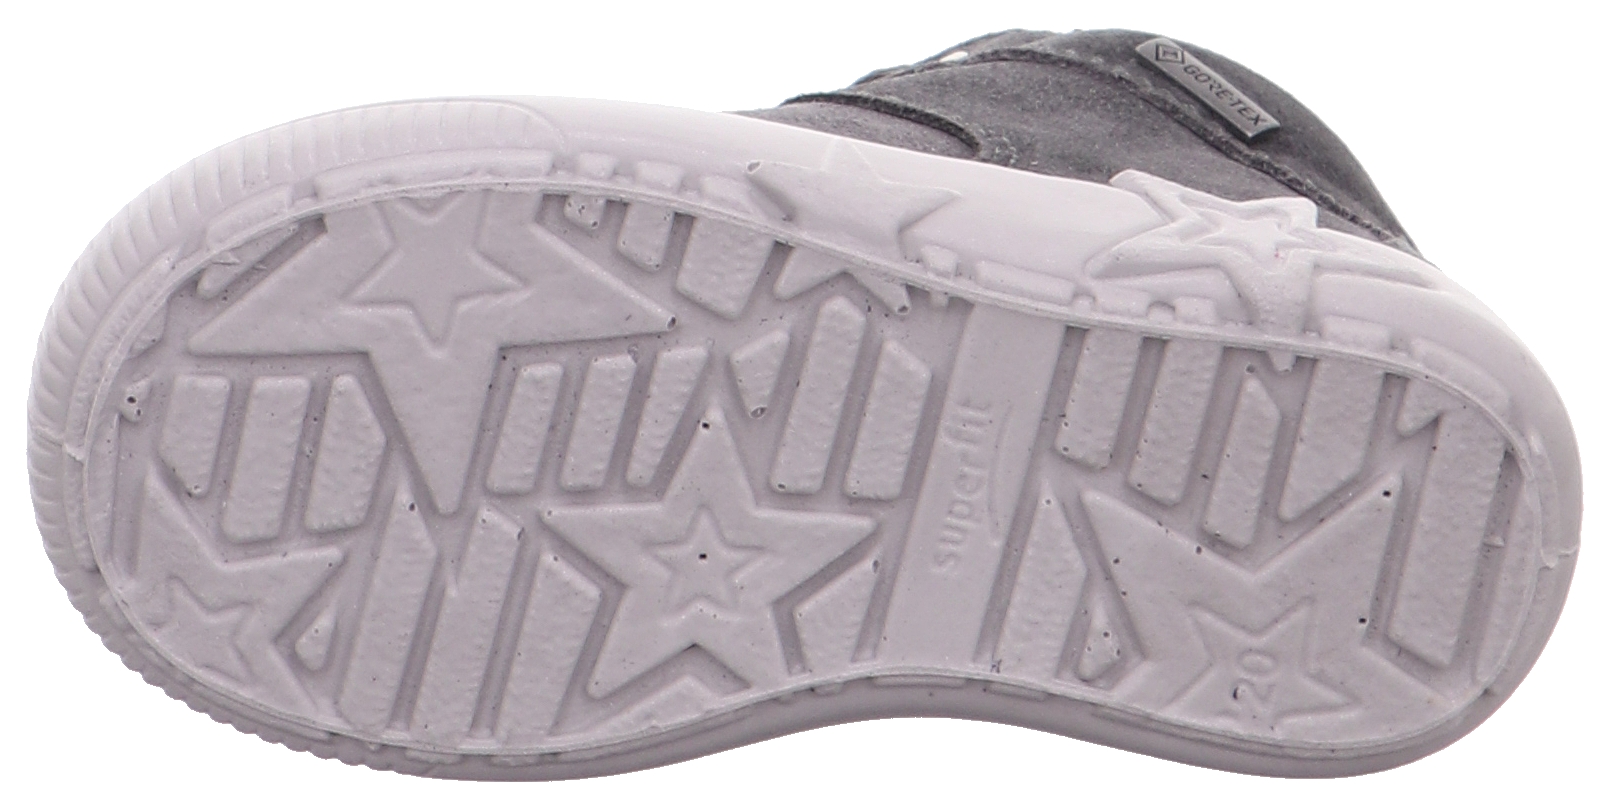 Superfit Starlight - Grey suede leather